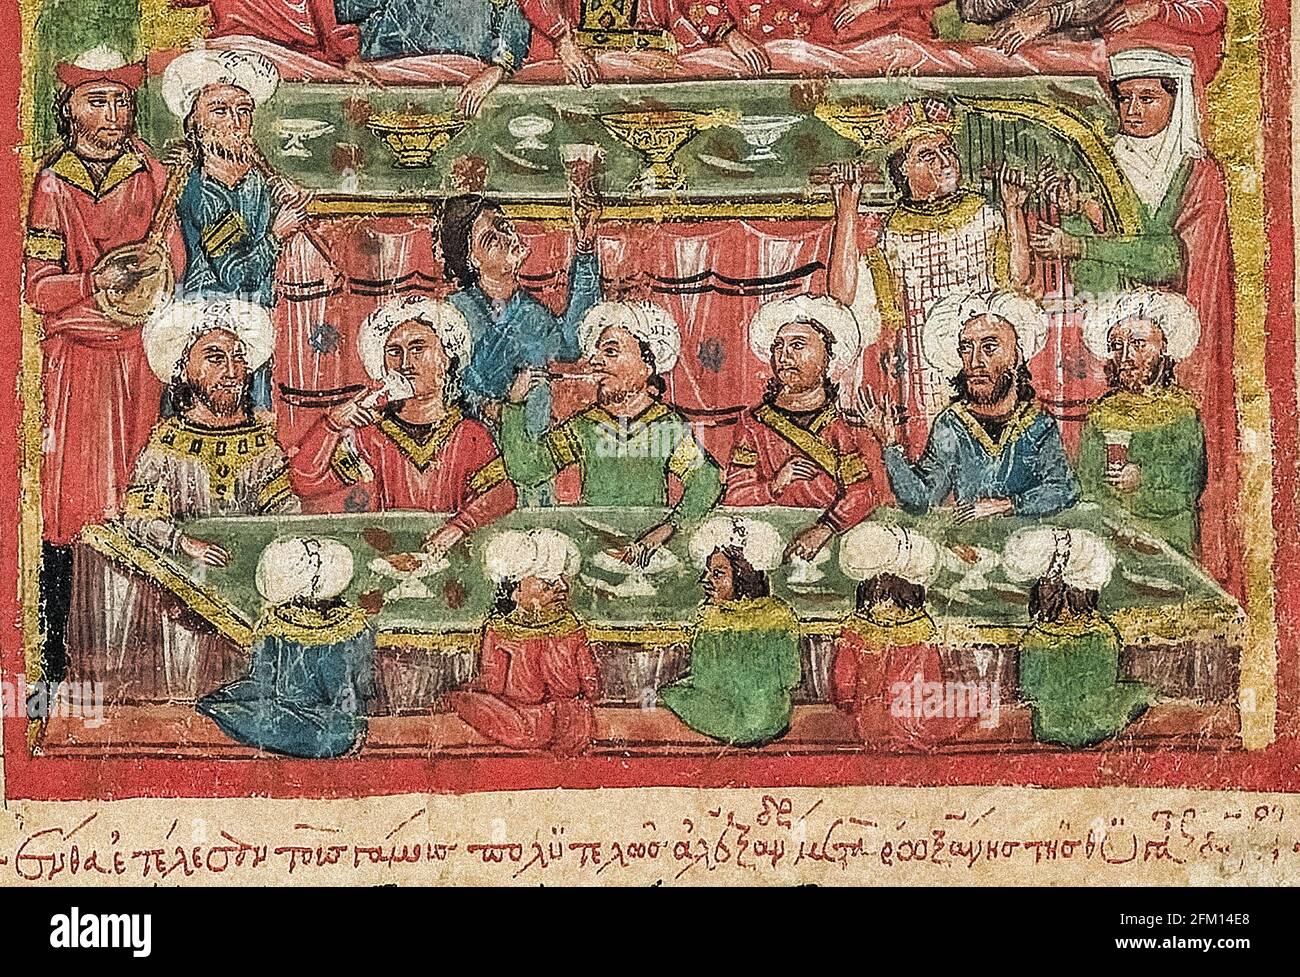 A cropped fourteenth-century miniature Greek manuscript depicting scenes from the life of Alexander the Great, this scene shows Byzantine Greek musicians and various musical instruments. The scene depicted entirely in Byzantine fashion of the period. Late Byzantine period (1204-1453). “Alexander Romance” in S. Giorgio dei Greci in Venice. Stock Photo